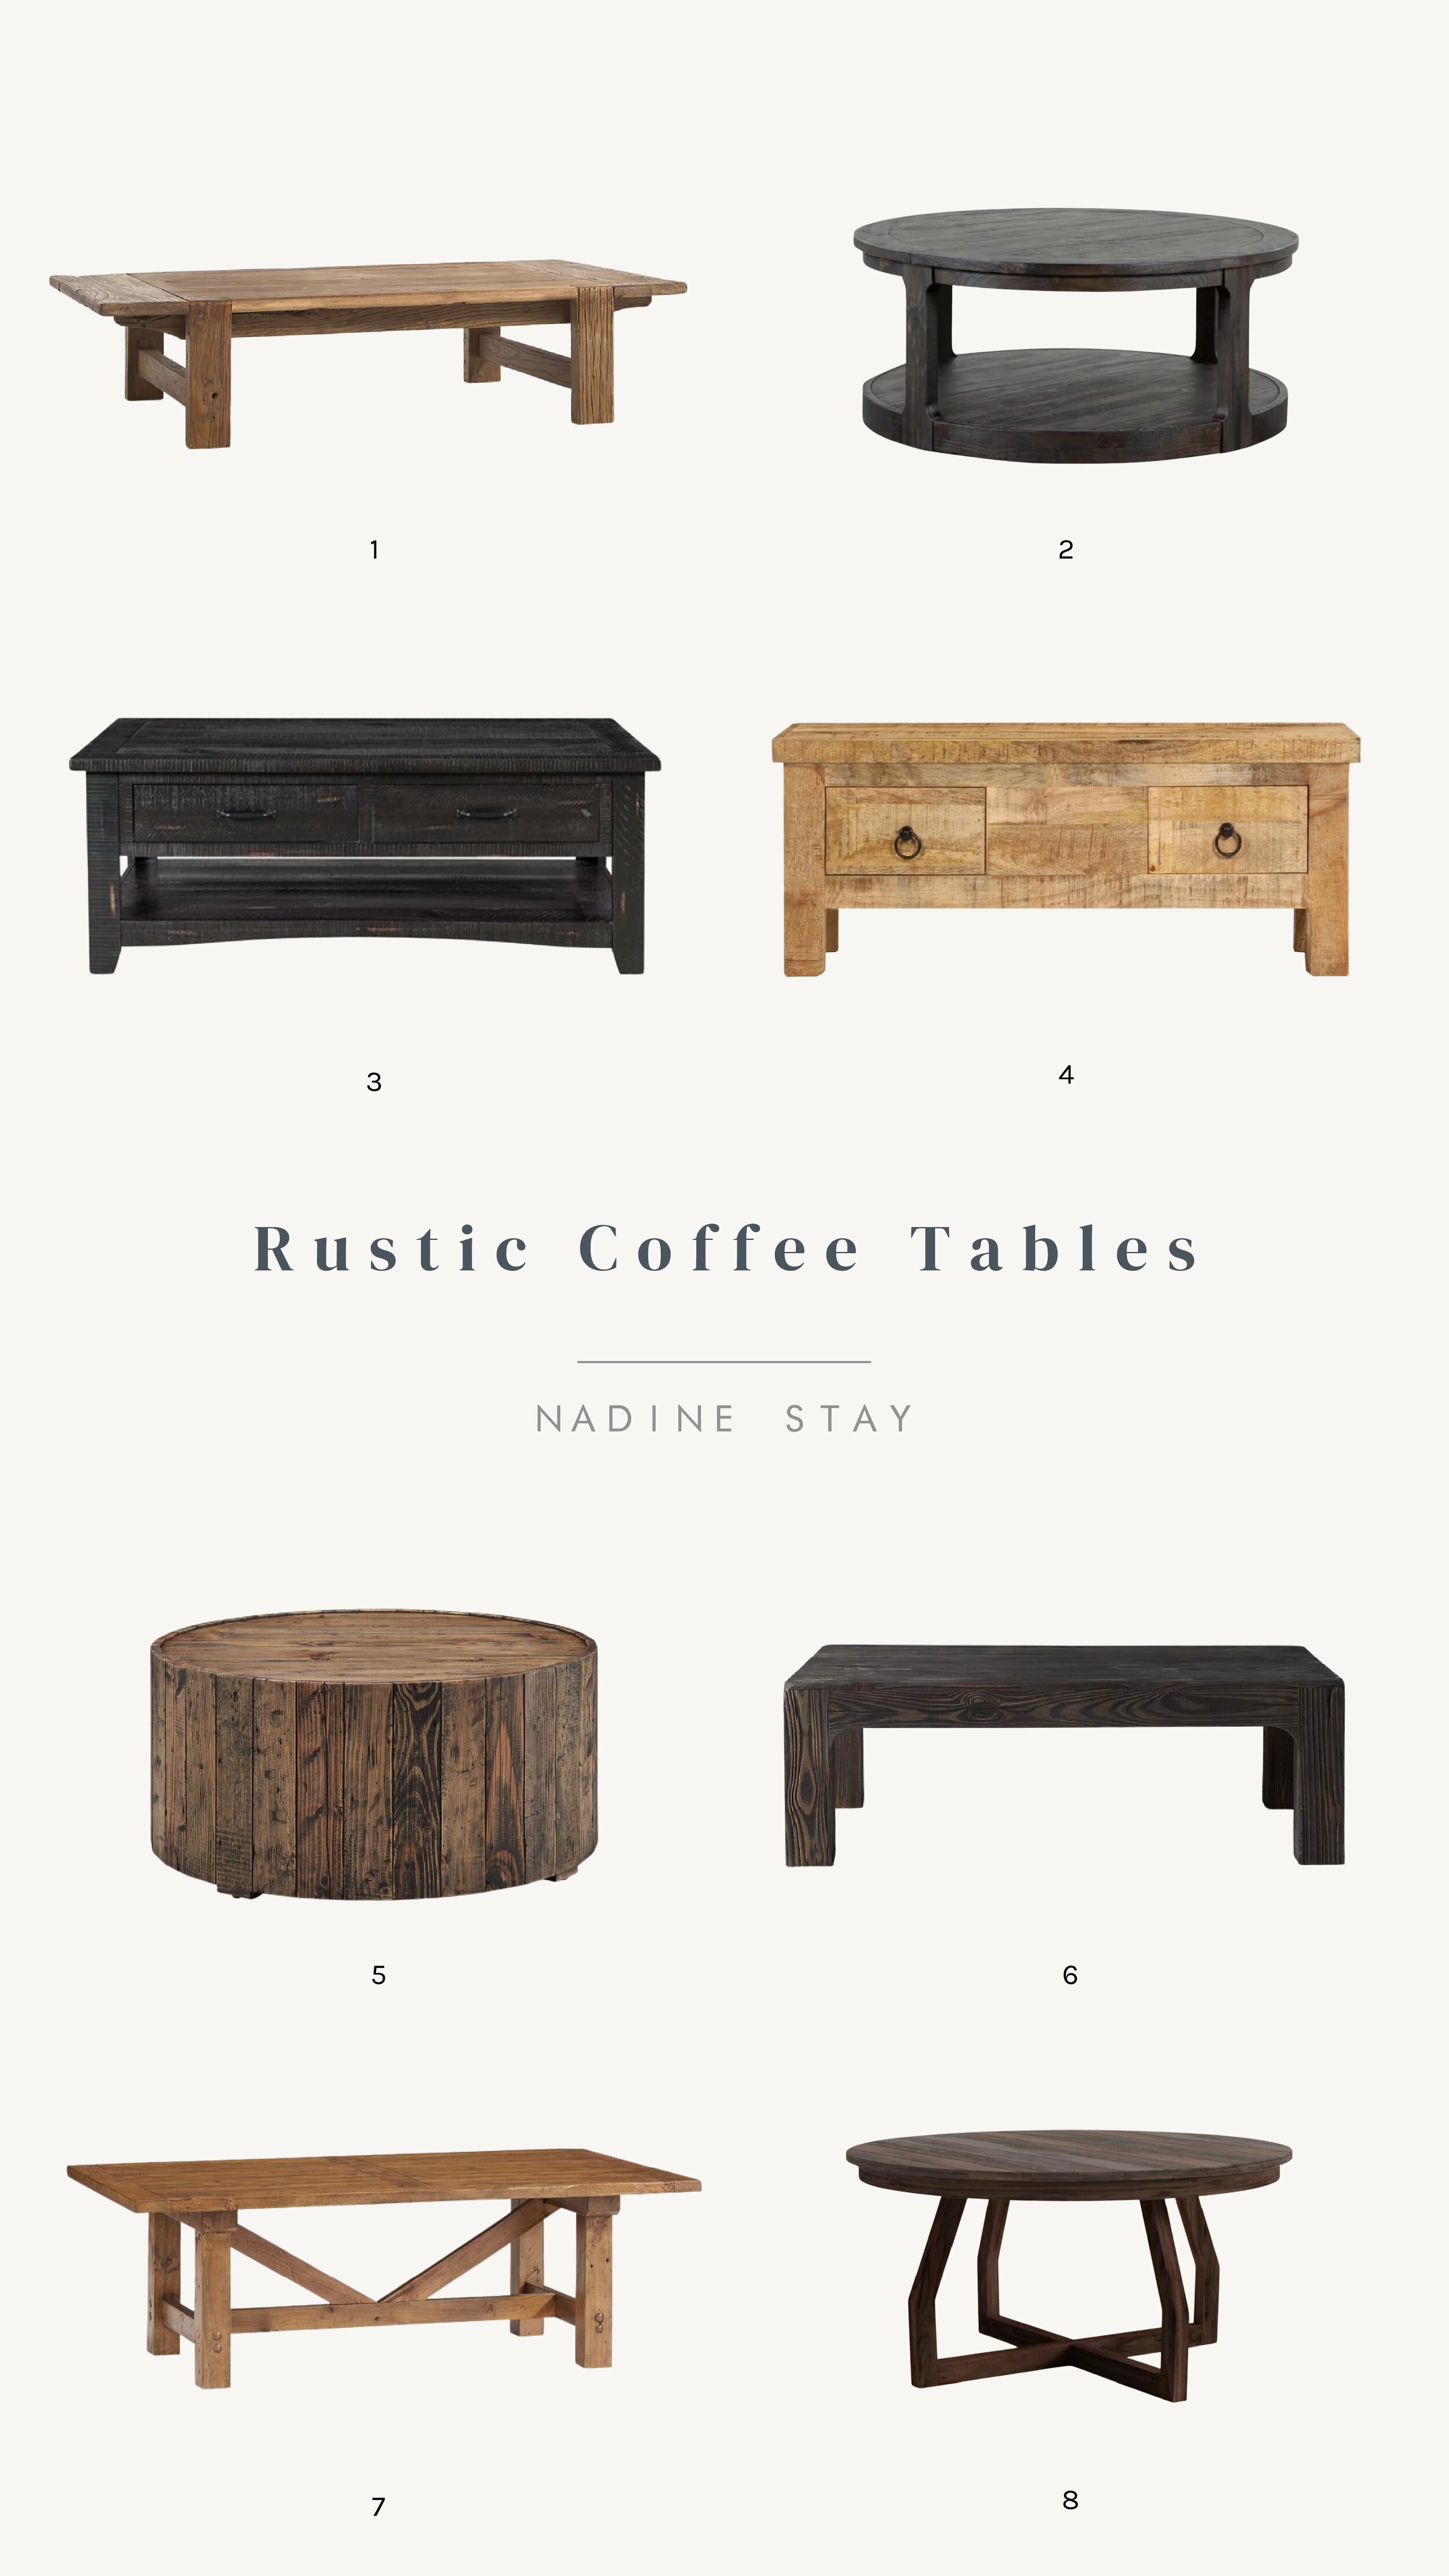 Rustic Coffee Tables for a cabin inspired living room. Weathered wood coffee table sources by Nadine Stay